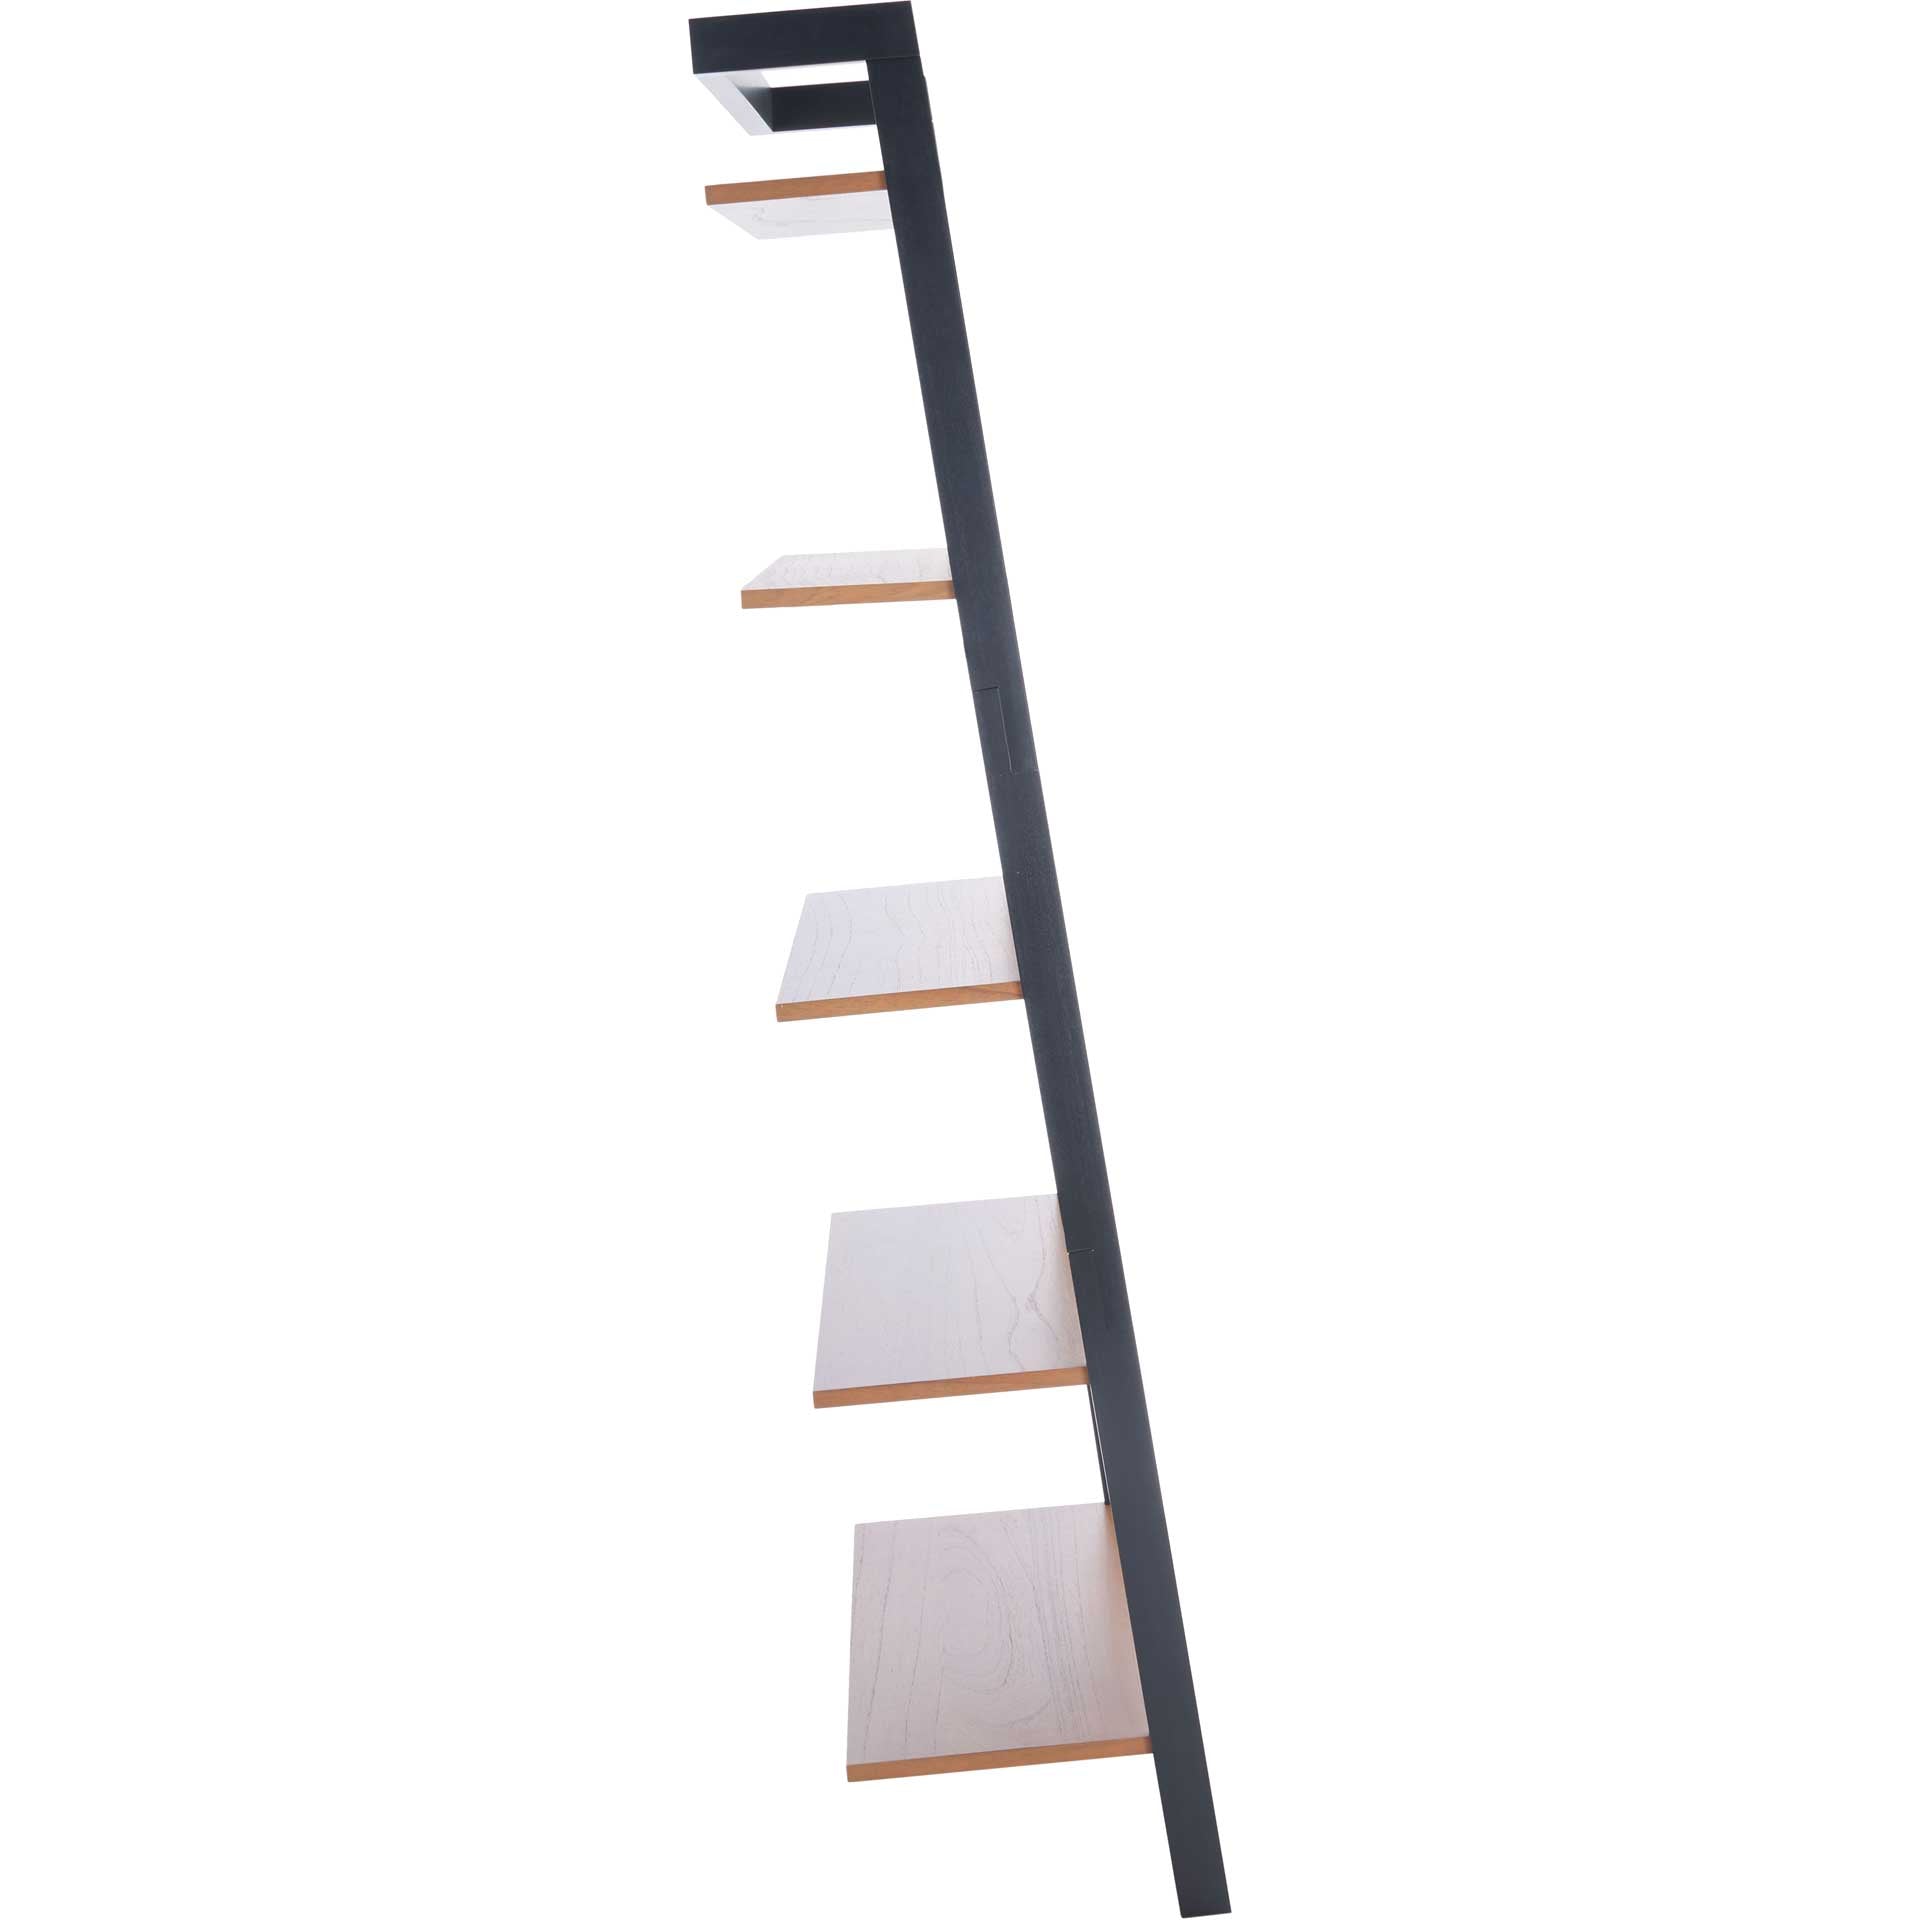 Belami 5 Tier Leaning Etagere Natural/Charcoal